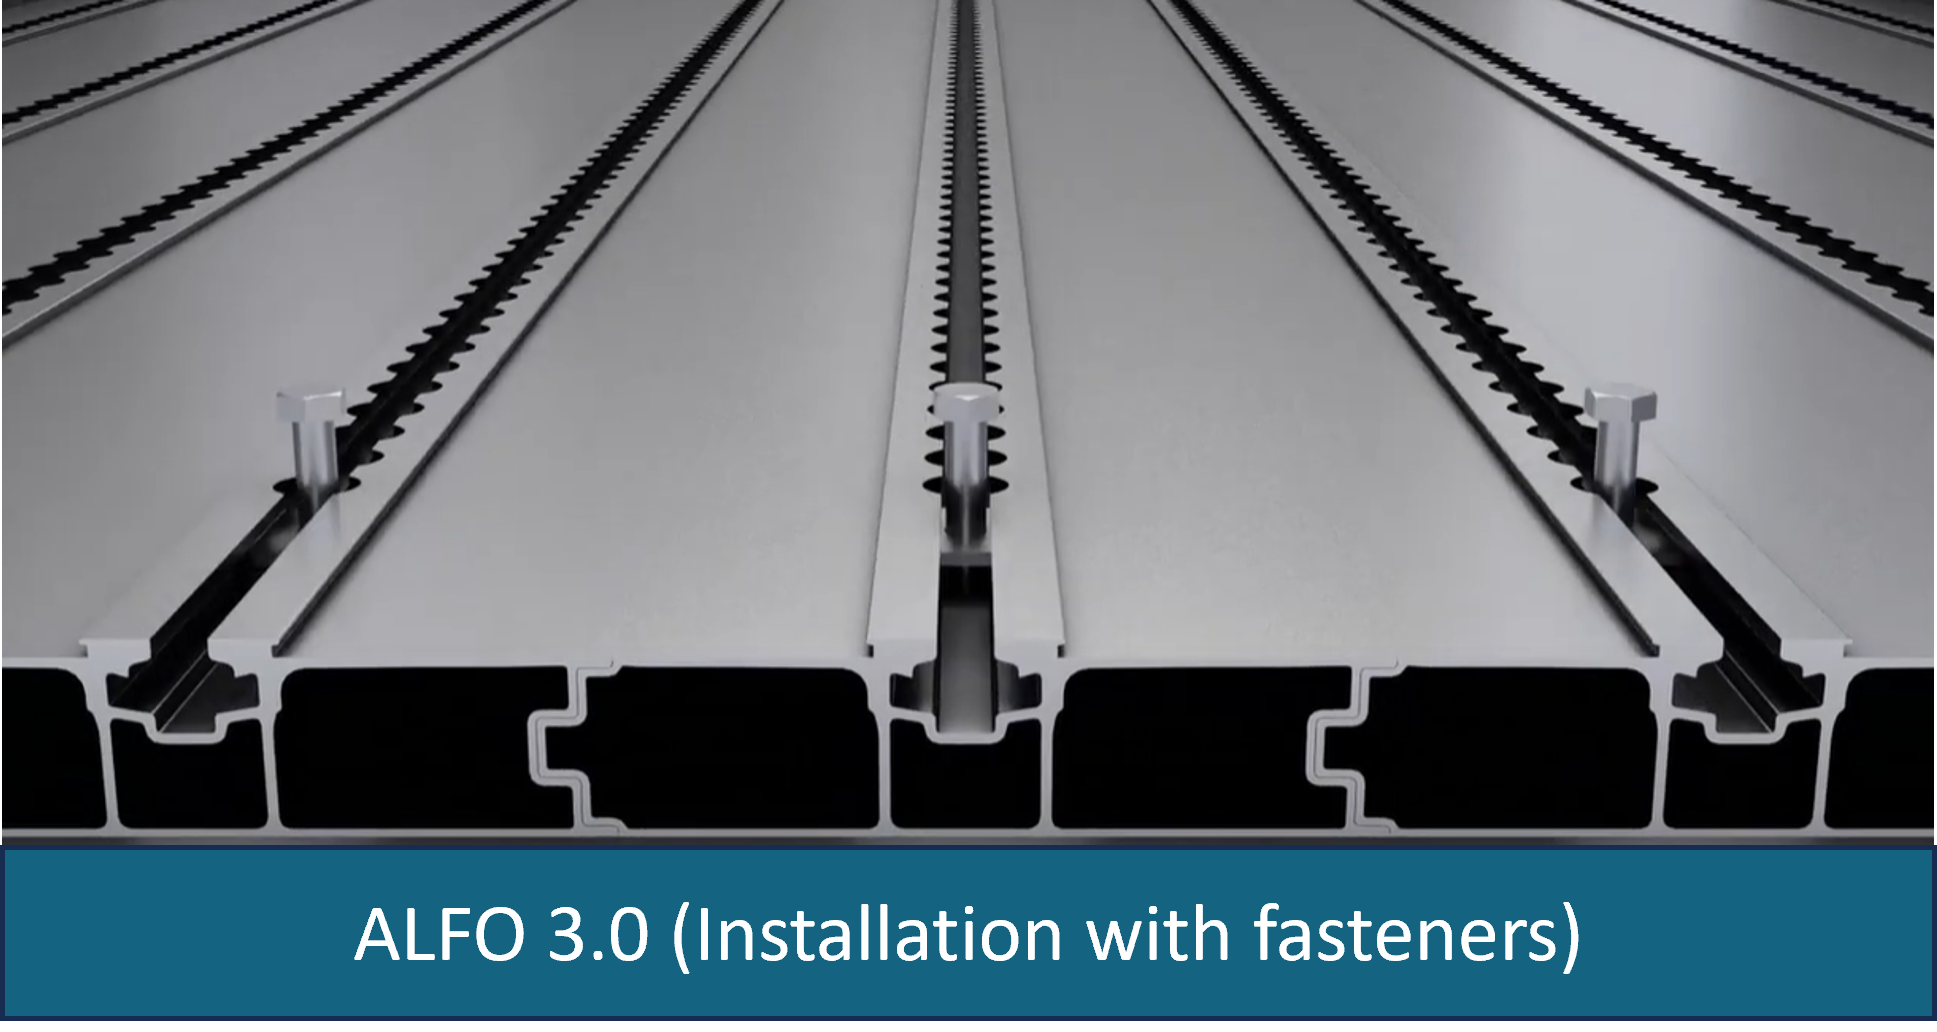 ALFO 3.0 (Installation with fasteners)